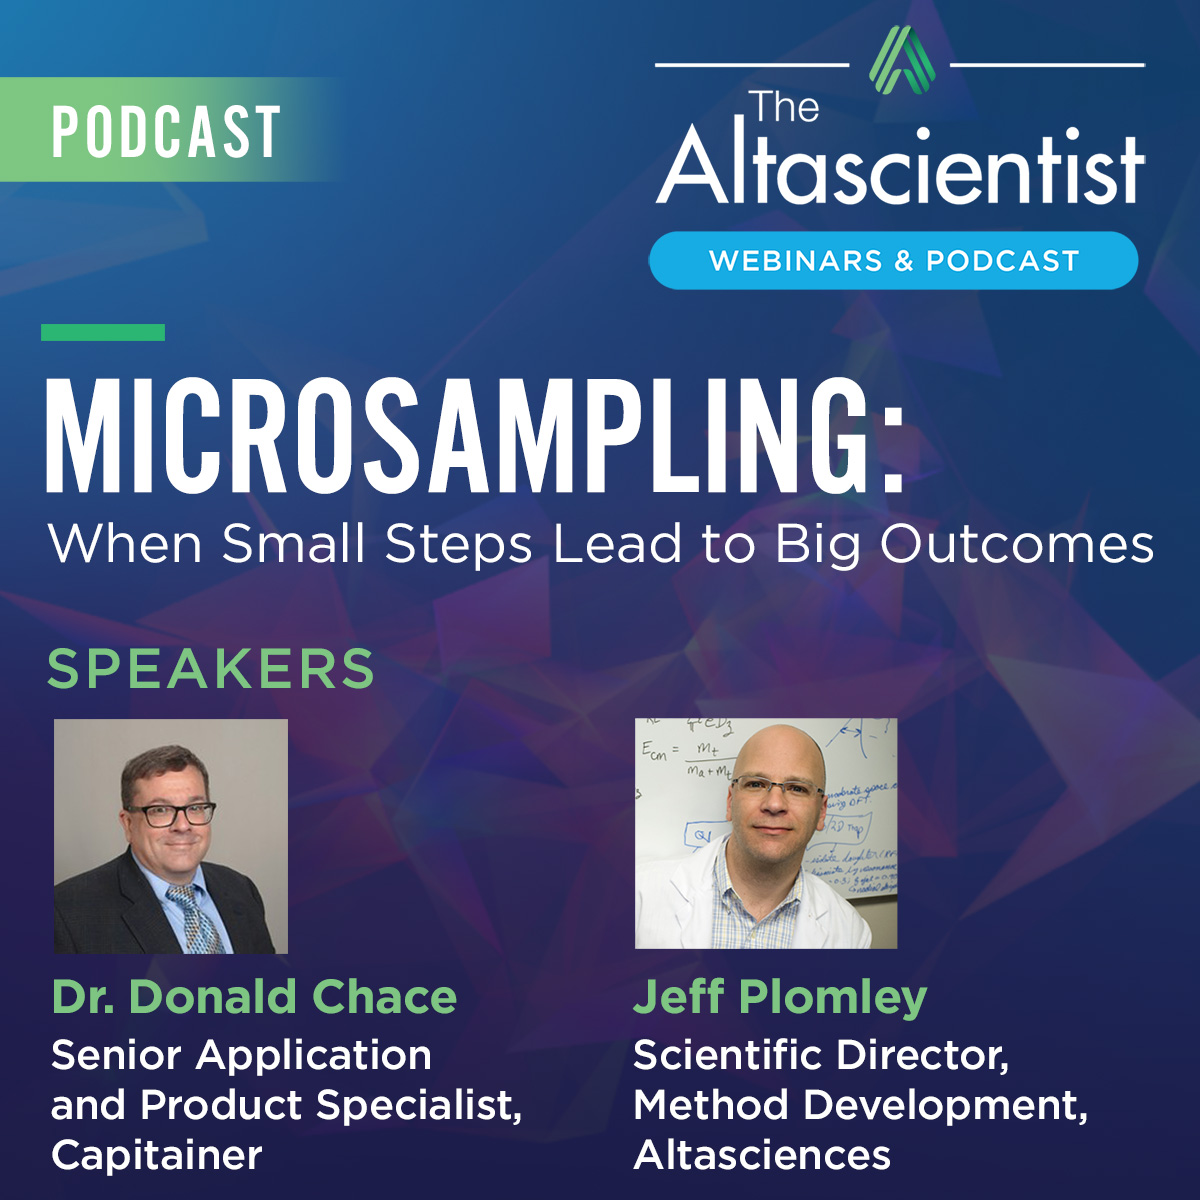 Microsampling: When Small Steps Lead to Big Outcomes